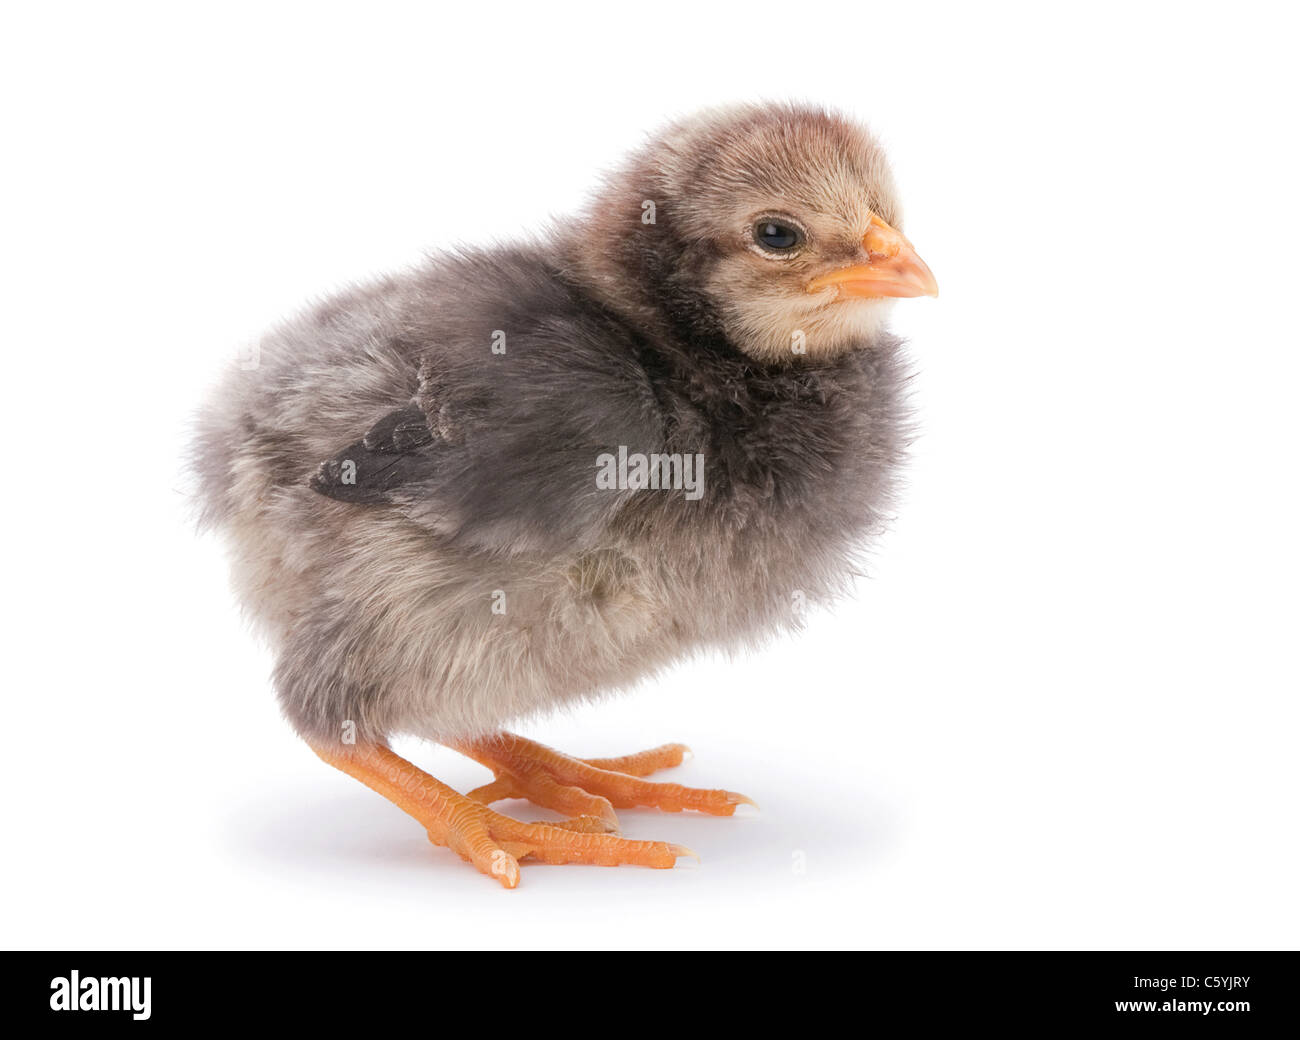 Baby chicken closeup isolated on white background Stock Photo